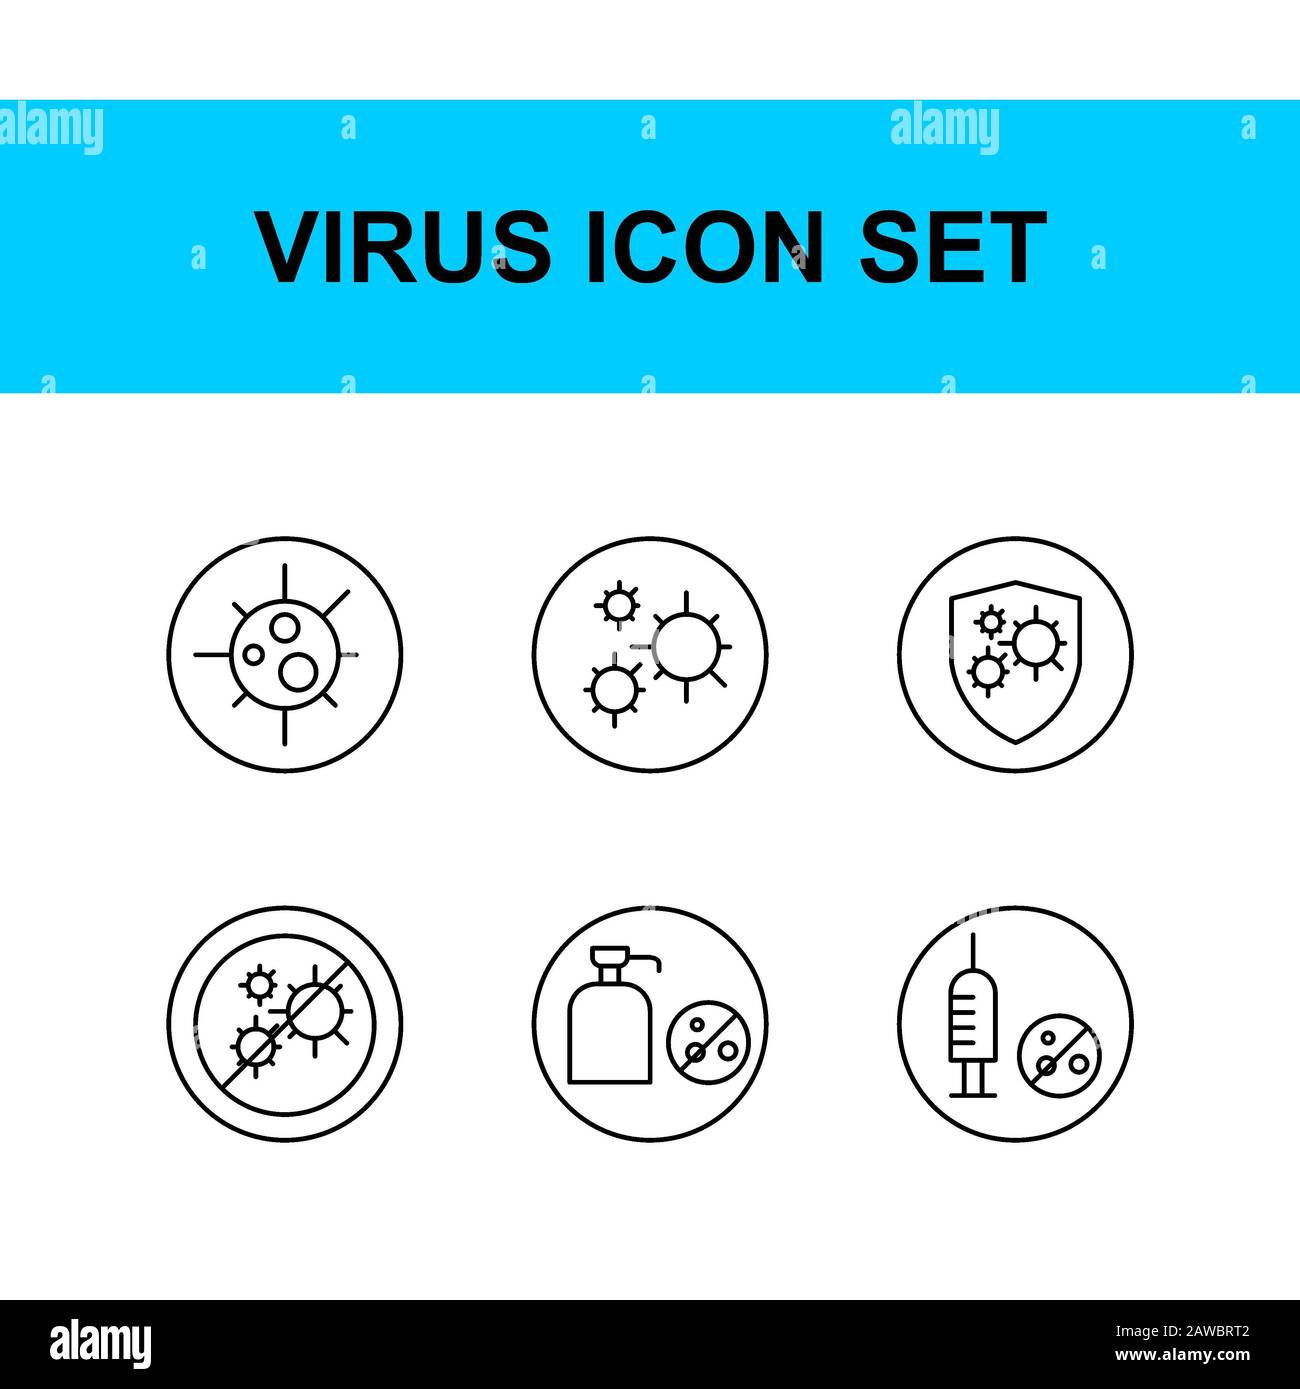 virus icon set. outline style.Flu, fever,cold, Virus, corona, lung, wash, hand, bottle, tablet, vaccine, bed, rest, anti-virus, spread. editable icon. Stock Photo